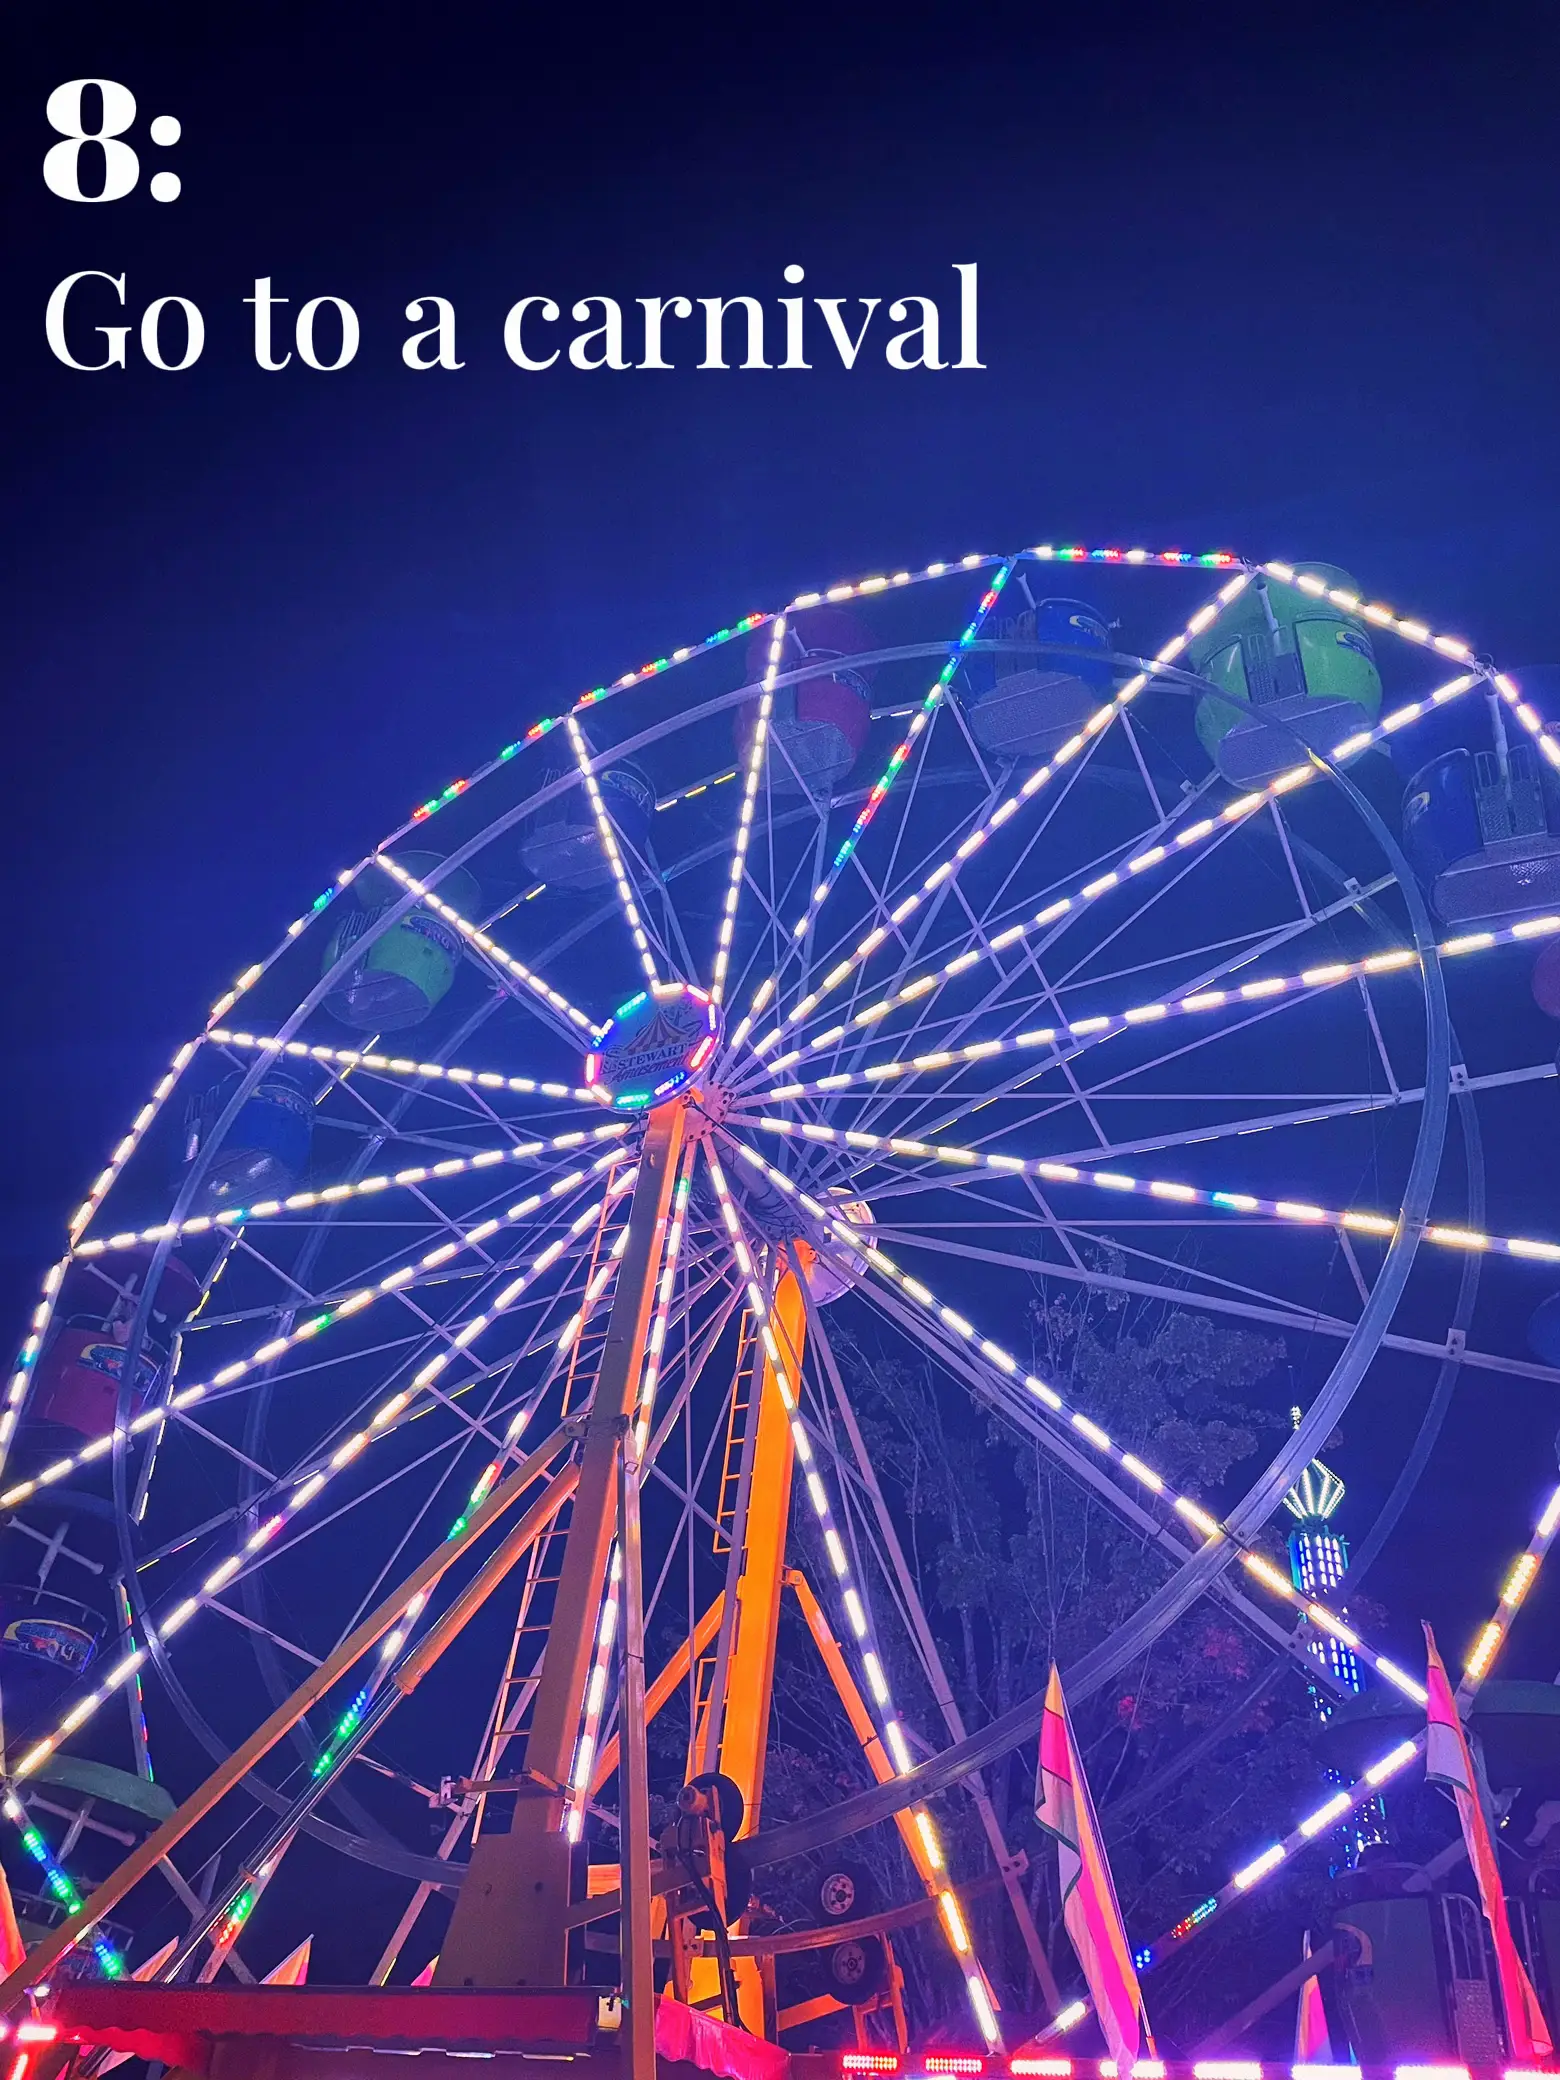  A large ferris wheel with lights on and a sign that says "Go to a carnival".